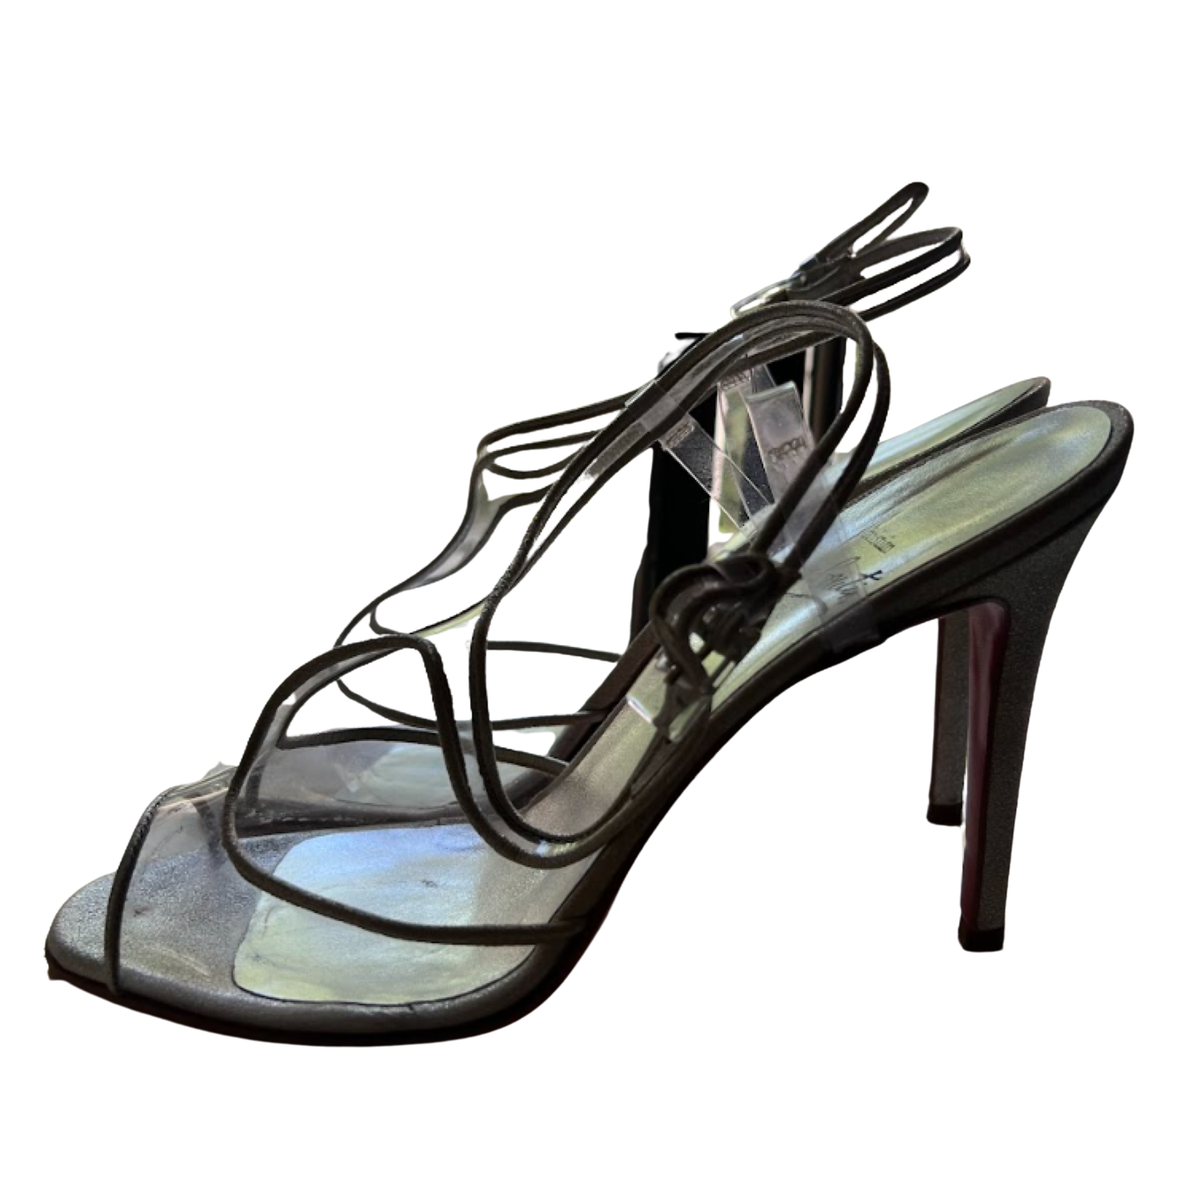 CHRISTIAN LOUBOUTIN Silver Strappy Sheer Heels | Size 38.5